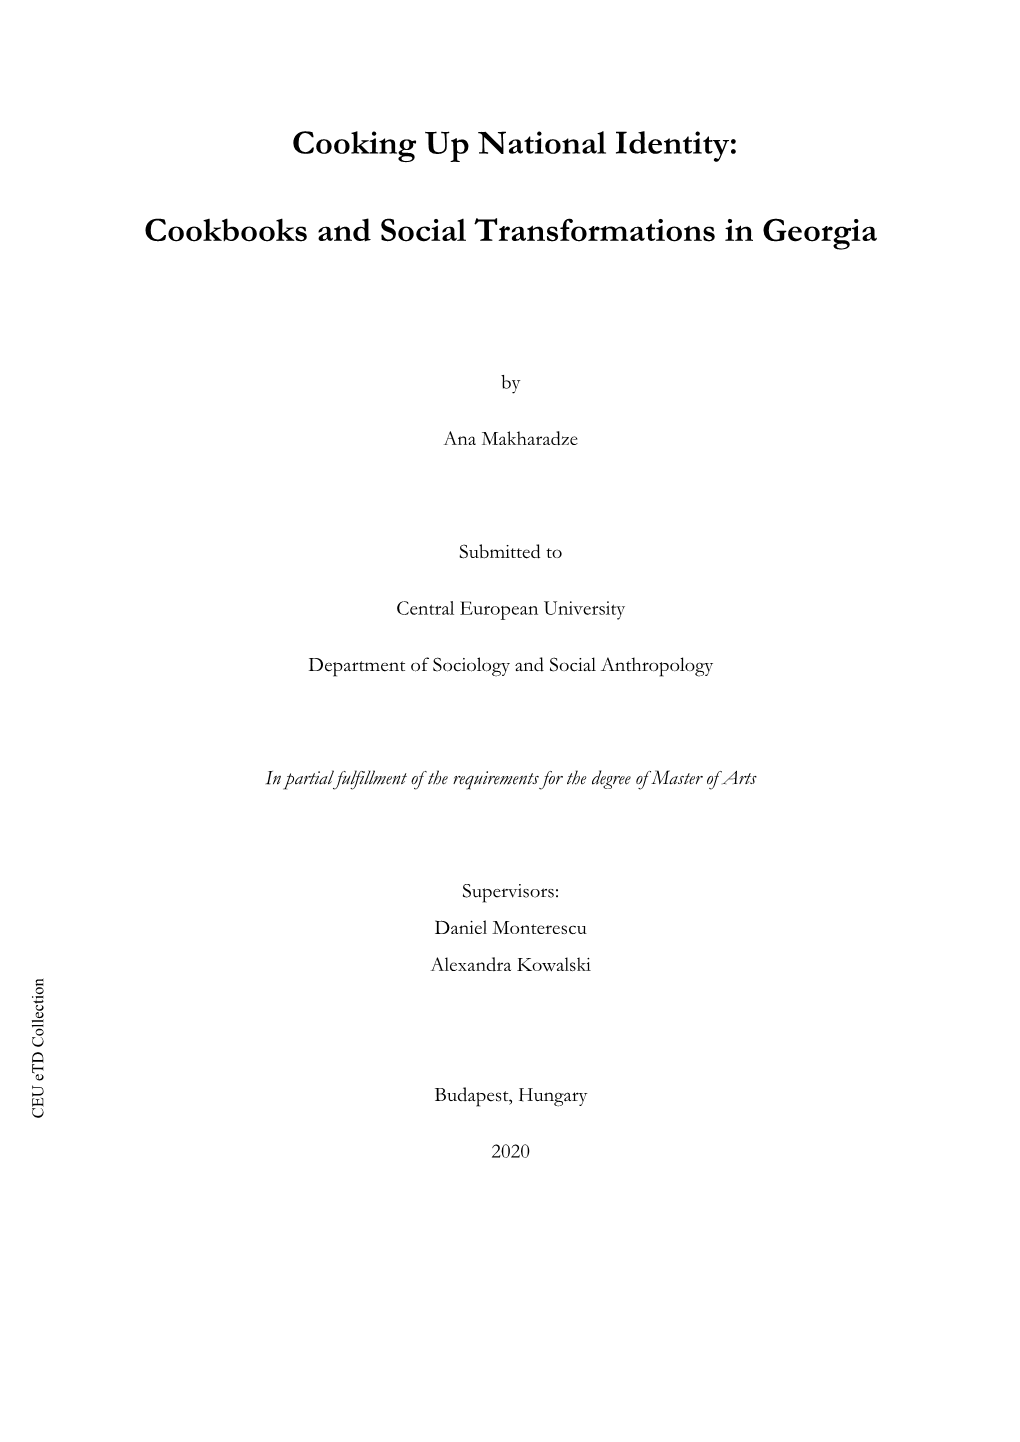 Cookbooks and Social Transformations in Georgia